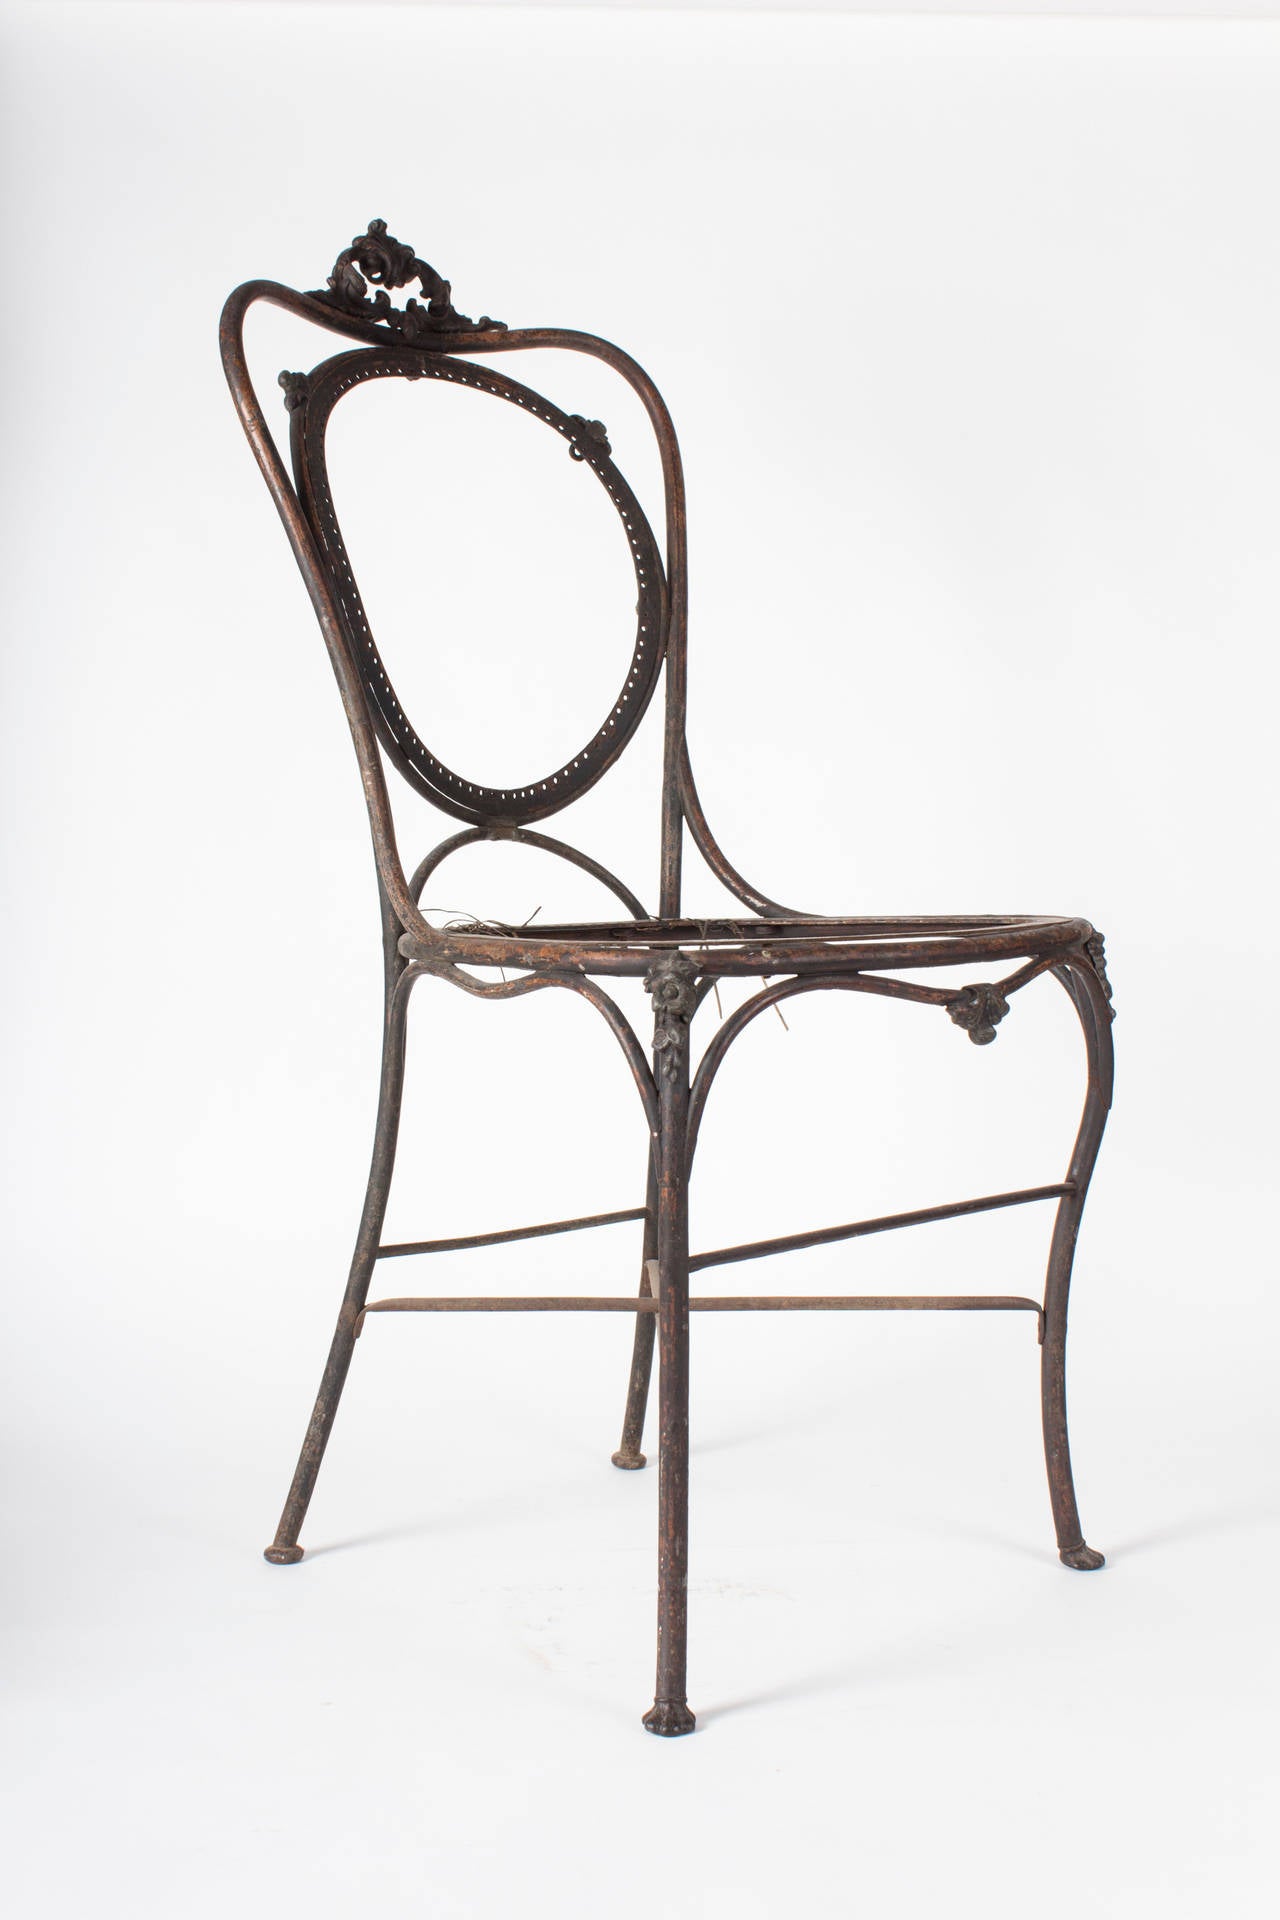 Iron with applied cast spelter foliate decorations. The woven cane (or
palm) of seat and back is missing but could be replaced.
Seating height 44,5 cm, total height 96,5 cm.

Literature:
Eva B. Ottilinger, Liselotte Hanzl, Kaiselriche